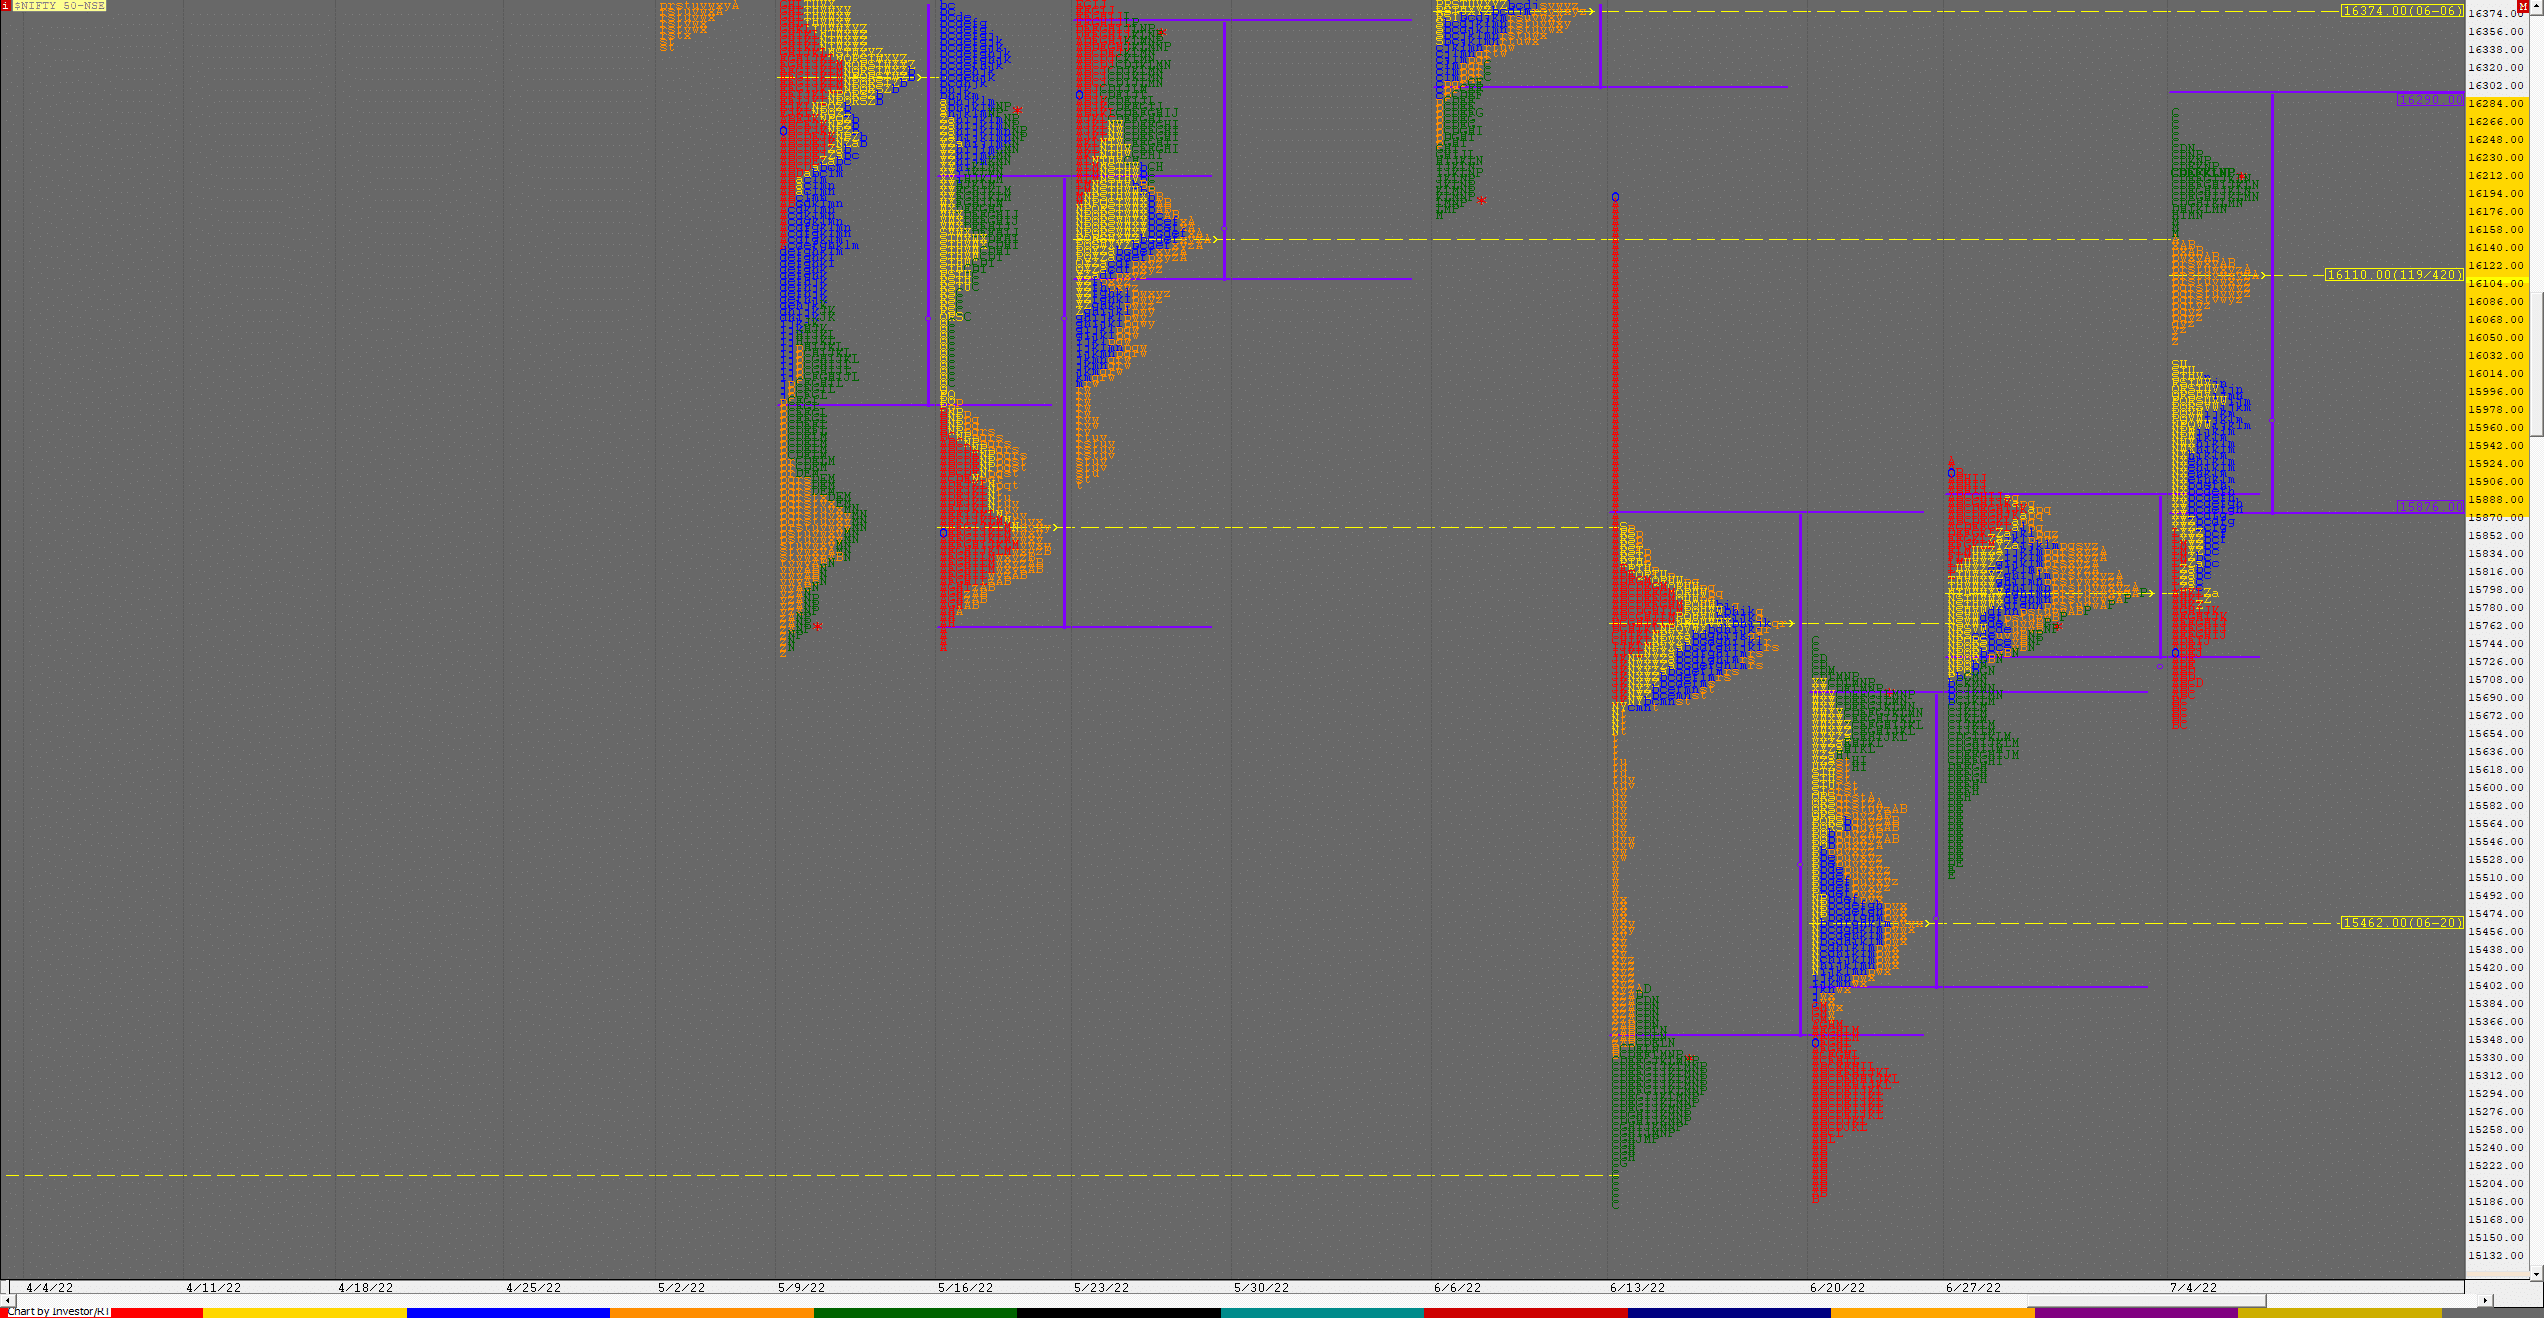 N Weekly 1 Weekly Charts (04Th To 08Th Jul 2022) And Market Profile Analysis Banknifty Futures, Charts, Day Trading, Intraday Trading, Intraday Trading Strategies, Market Profile, Market Profile Trading Strategies, Nifty Futures, Order Flow Analysis, Support And Resistance, Technical Analysis, Trading Strategies, Volume Profile Trading